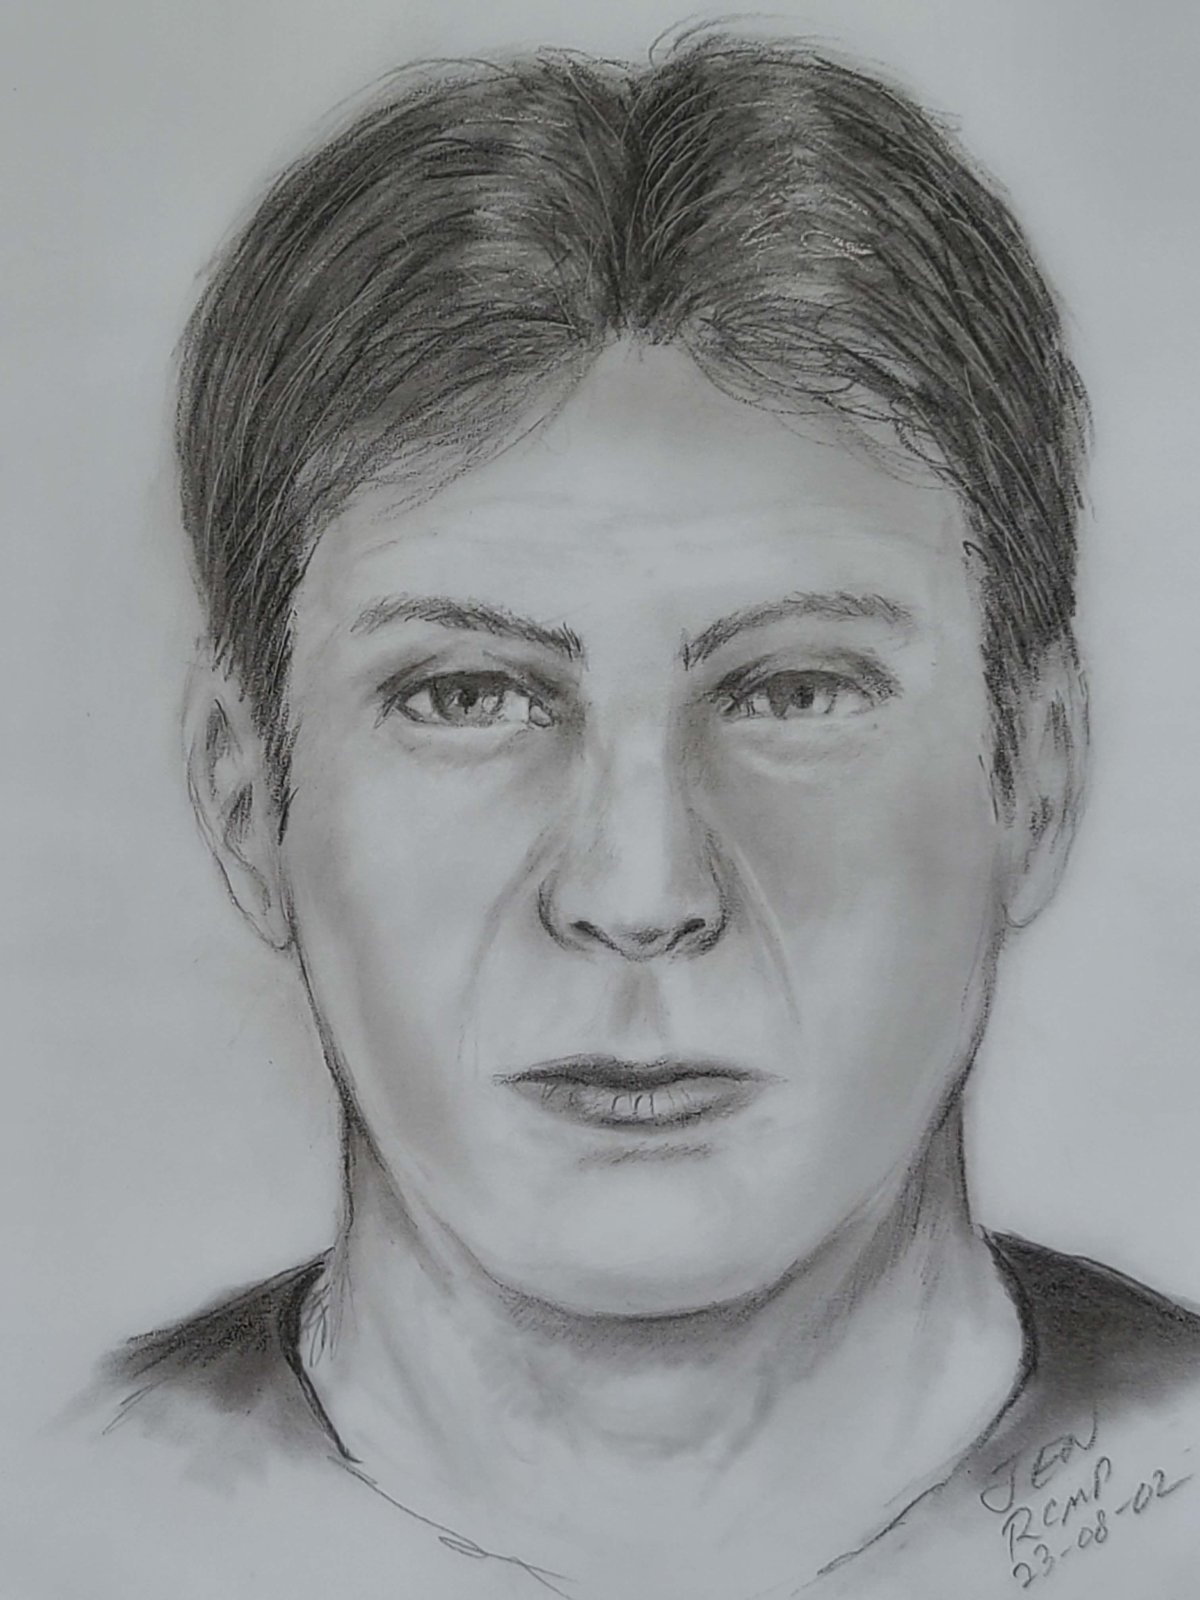 Airdrie RCMP seek public assistance with a historical missing person investigation